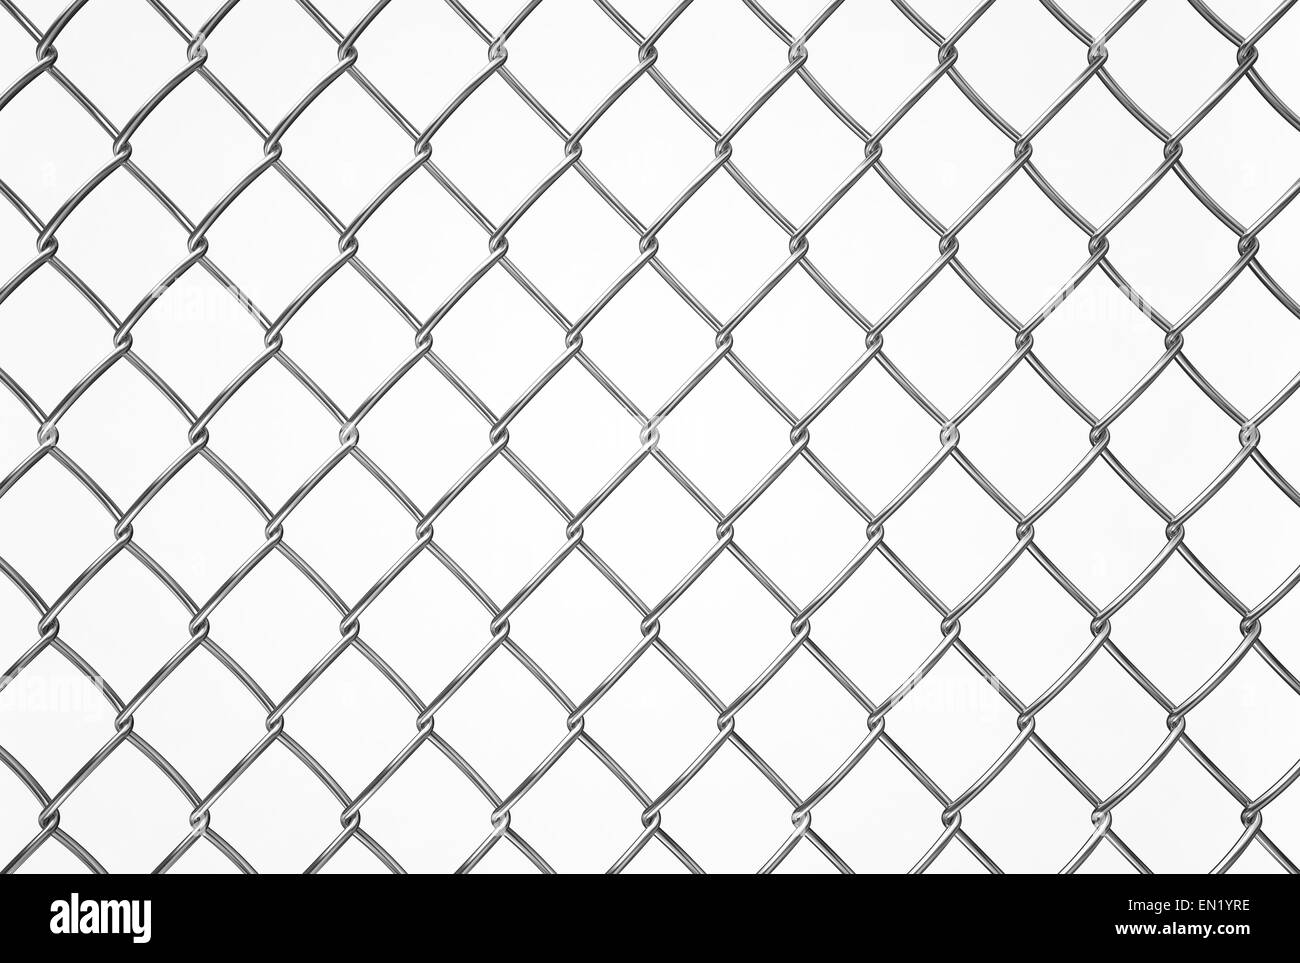 wired fence pattern on white background, texture Stock Photo